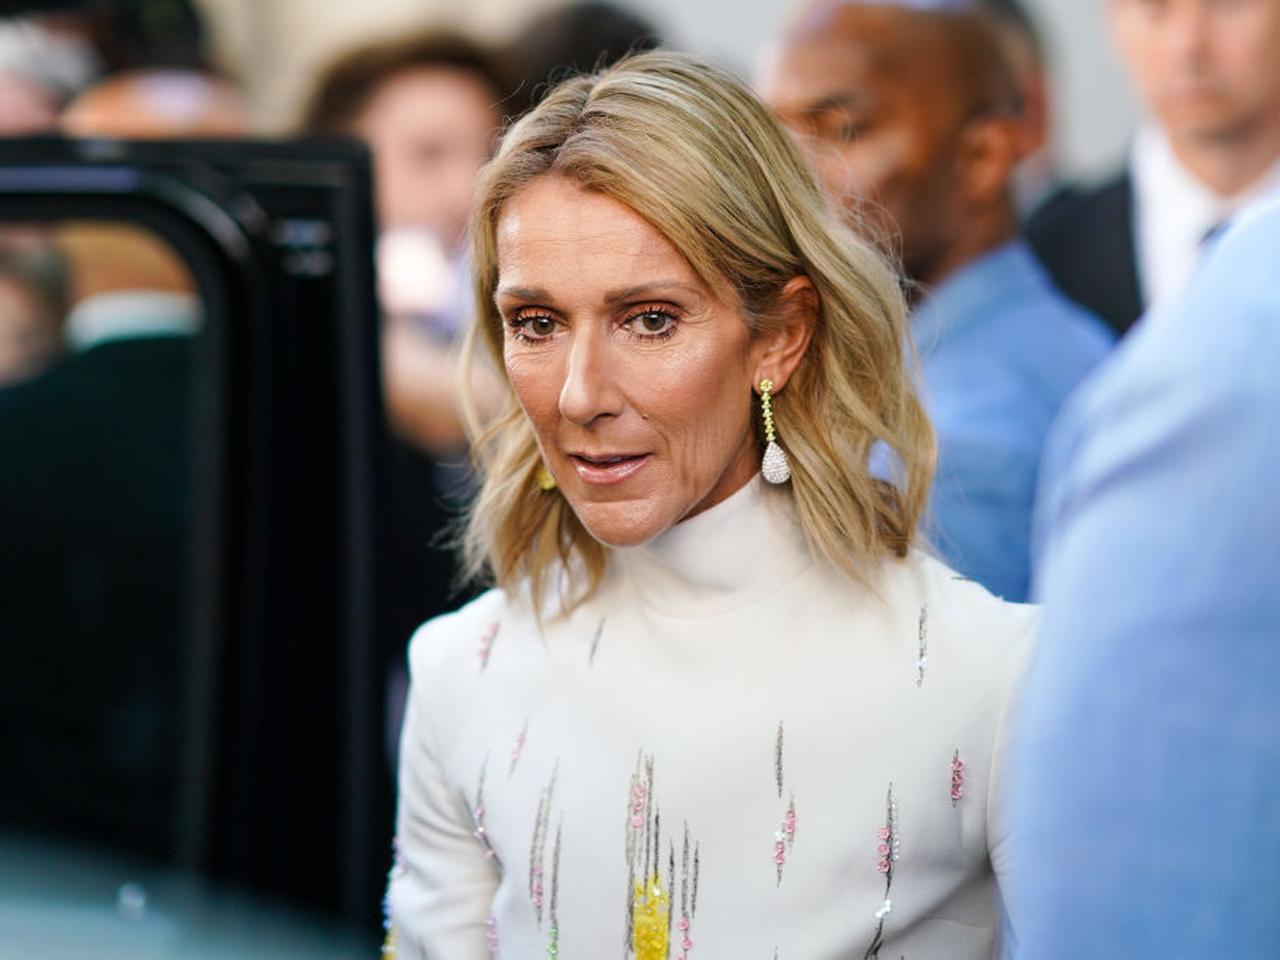 Celine Dion, 54, has been diagnosed with a terminal neurological disease: